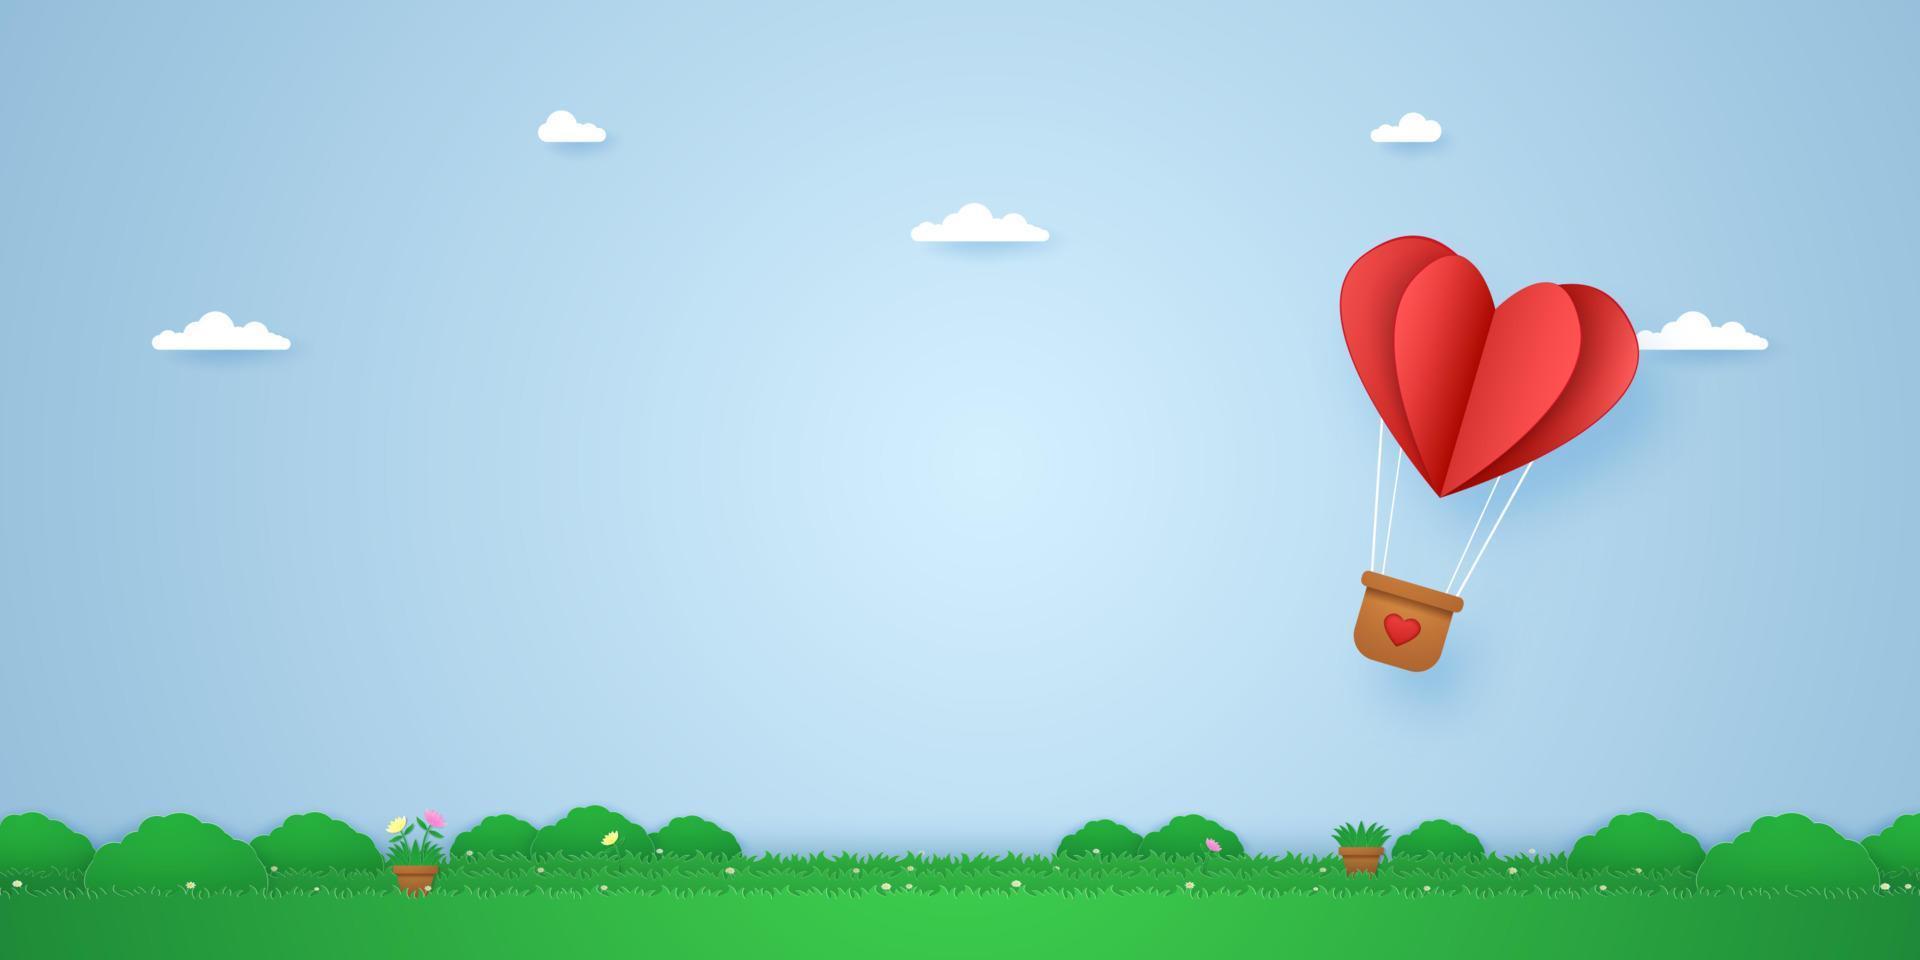 red folded heart hot air balloon flying over grass, paper art style vector